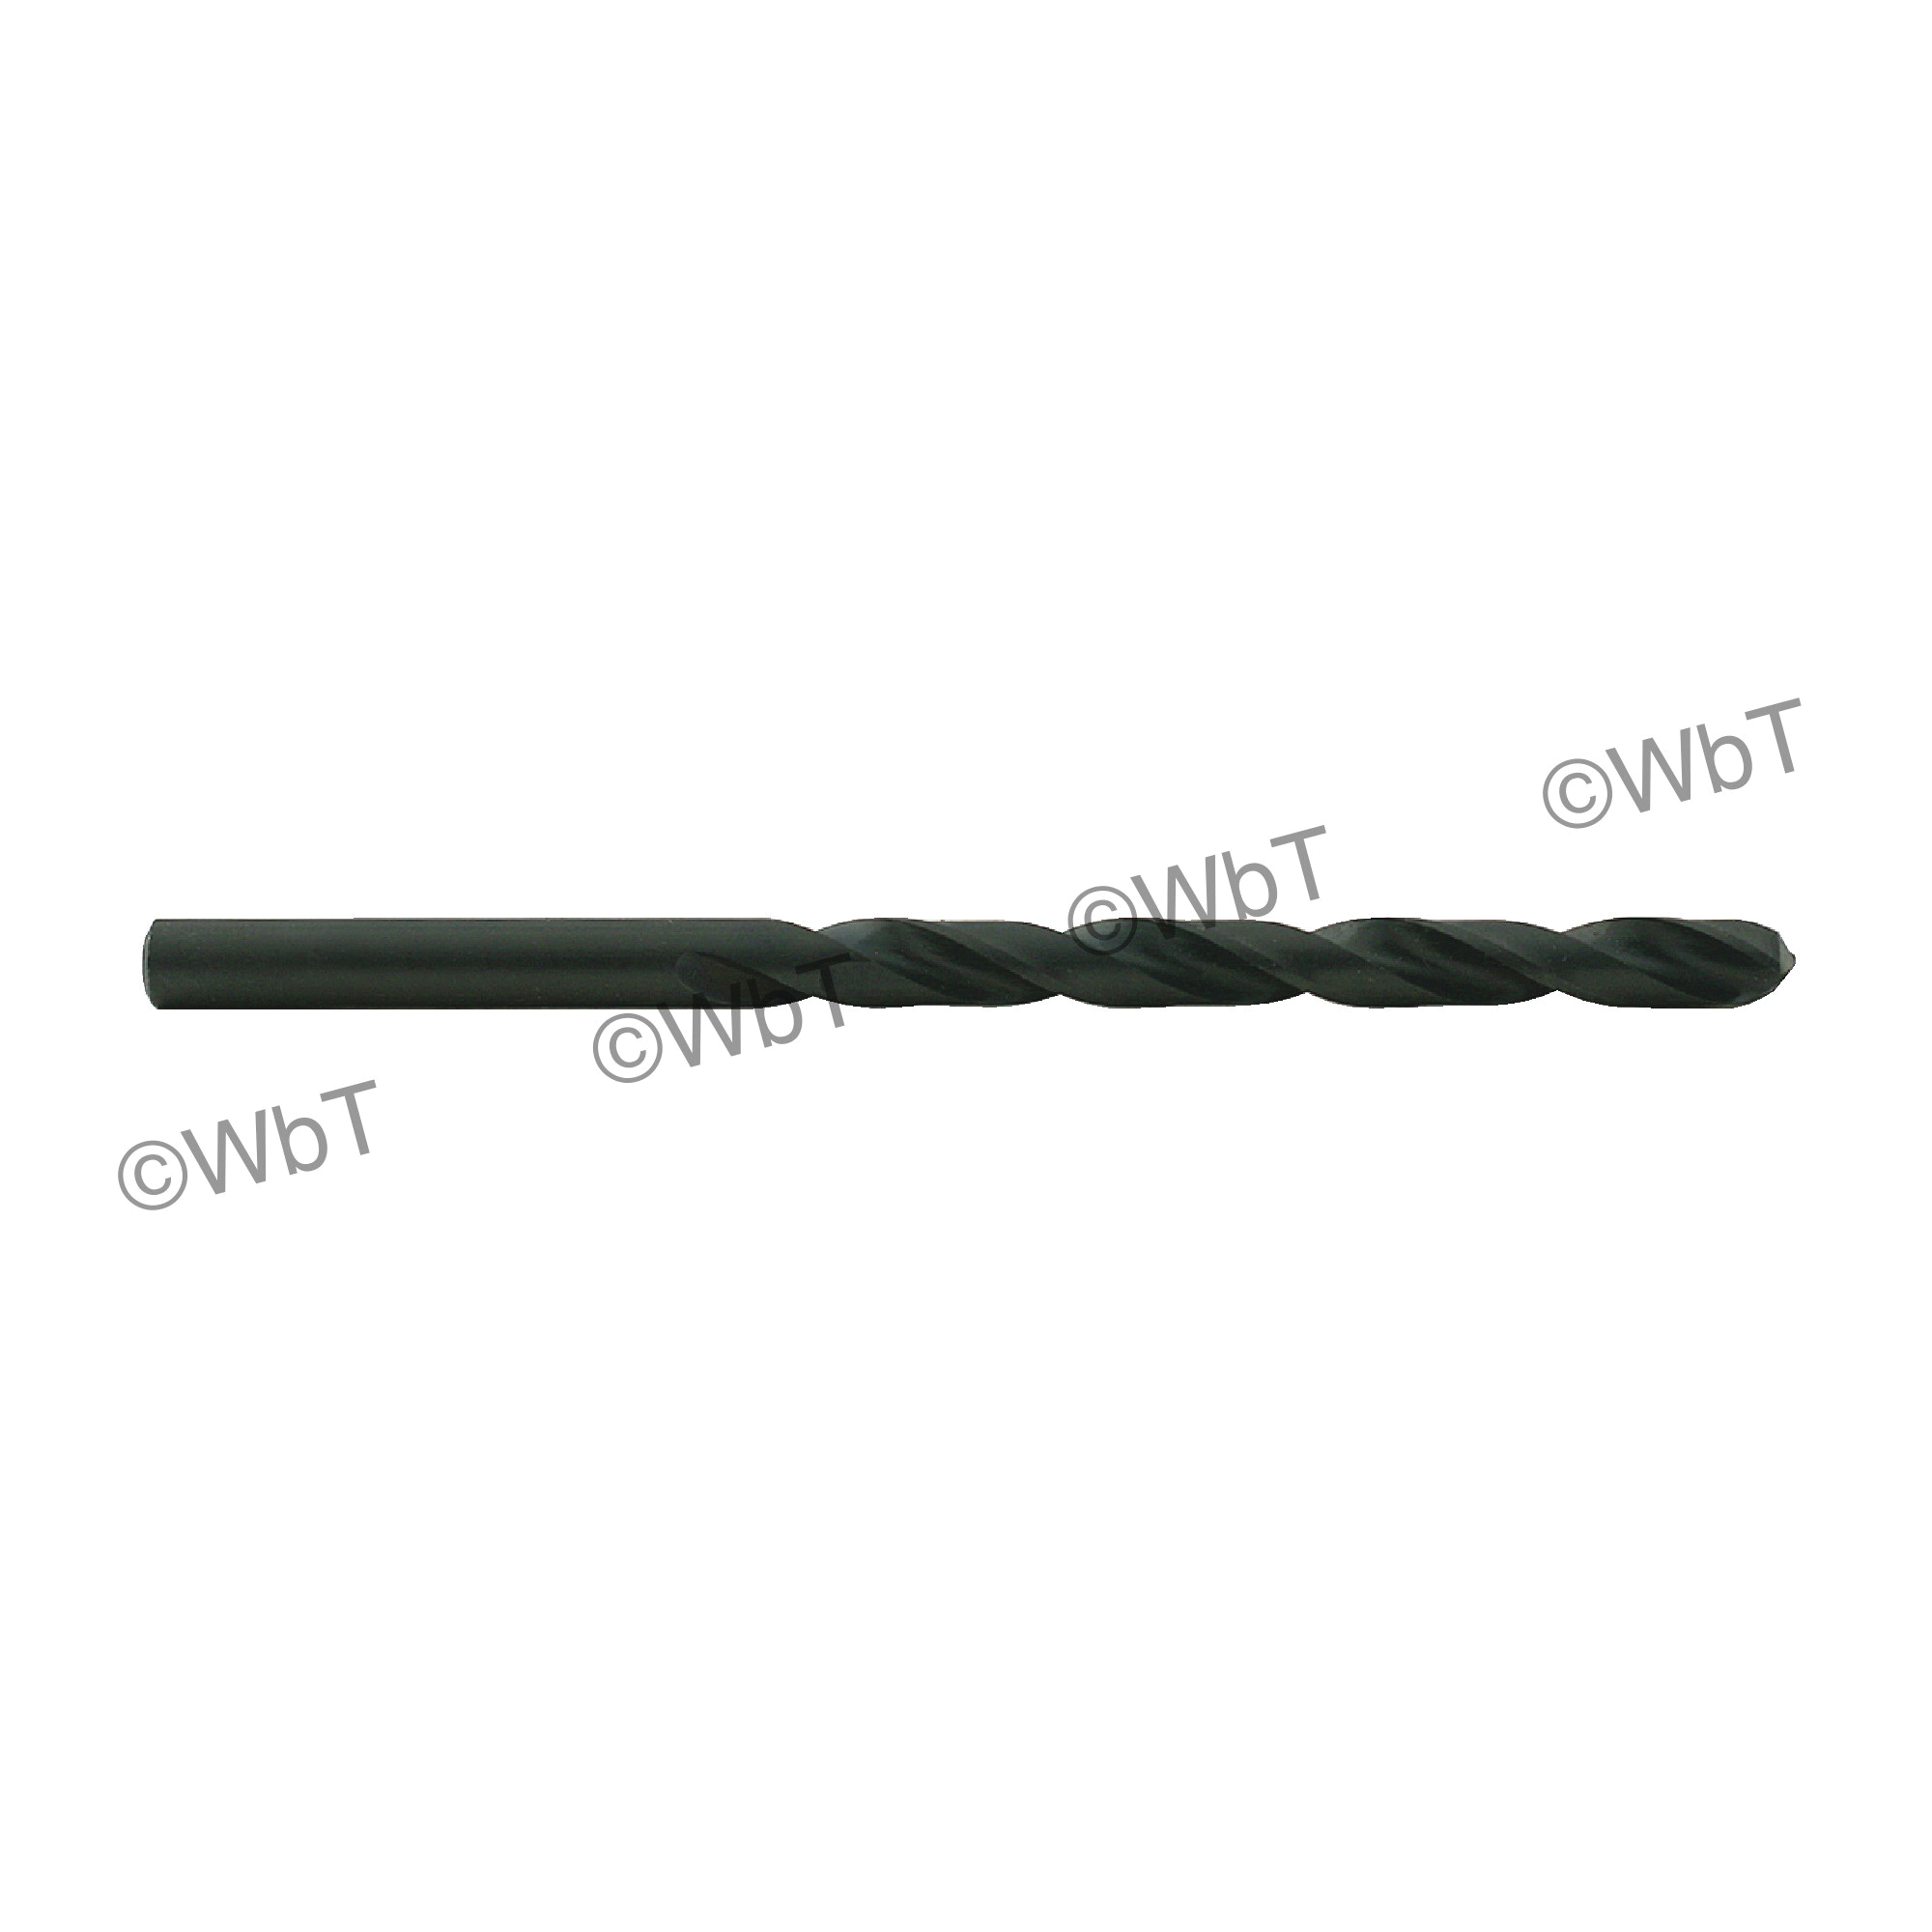 TTC 01-002-024 A2 Series General Purpose Heavy Duty Surface Treated Jobber Length Drill Bit, #24 Drill - Wire, 0.152 in Drill - Decimal Inch, 118 deg Point, HSS, Black Oxide